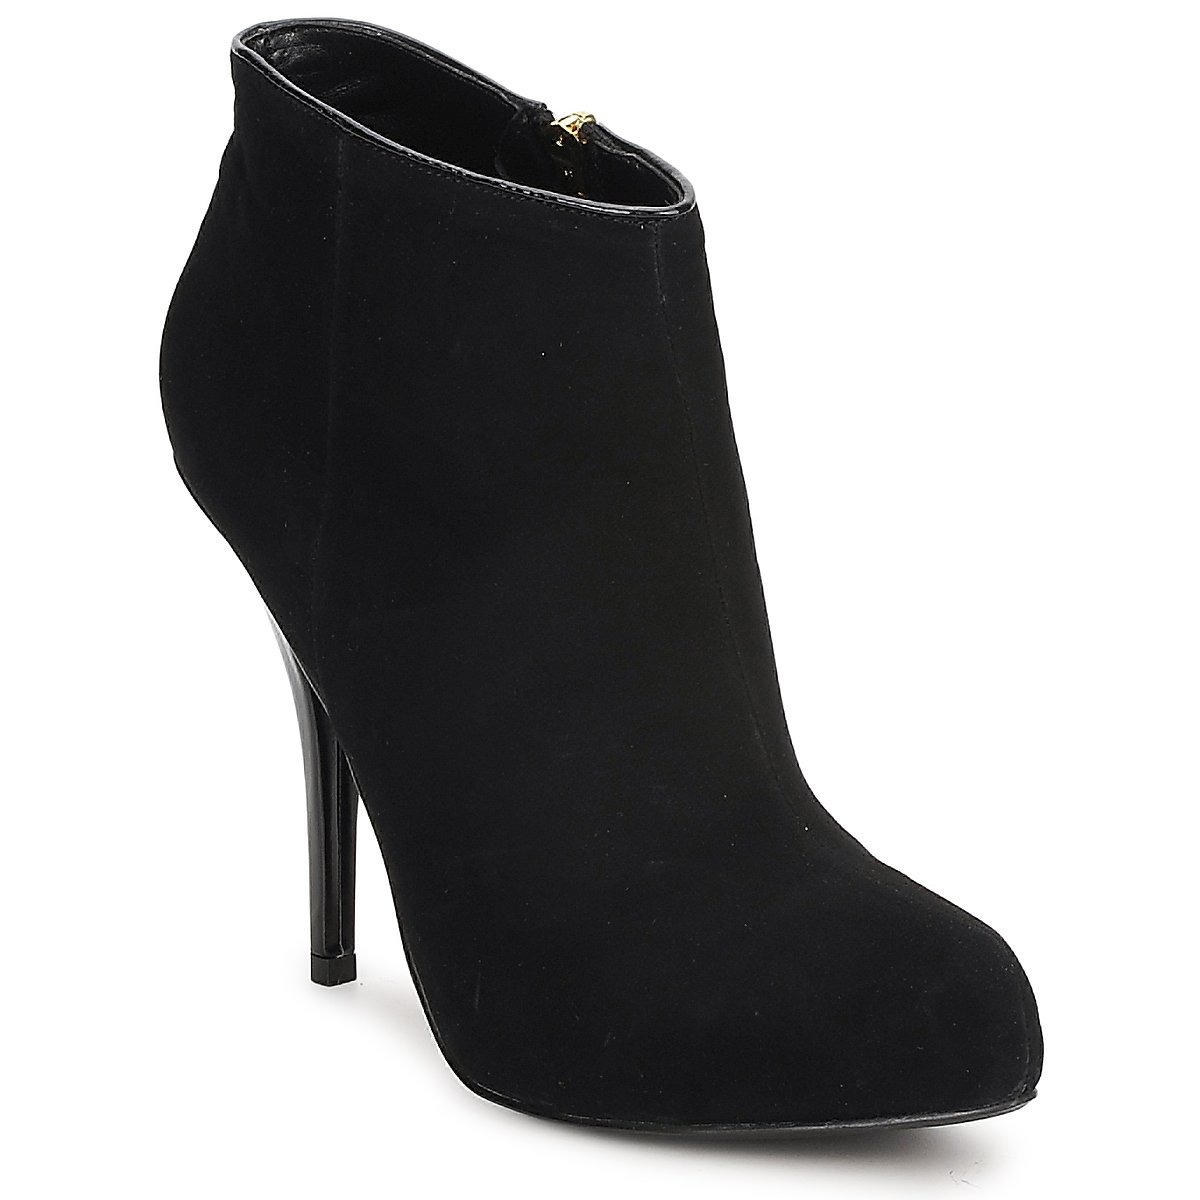 Chinese Laundry - Women's Low Ankle Boots Black at Spartoo GOOFASH